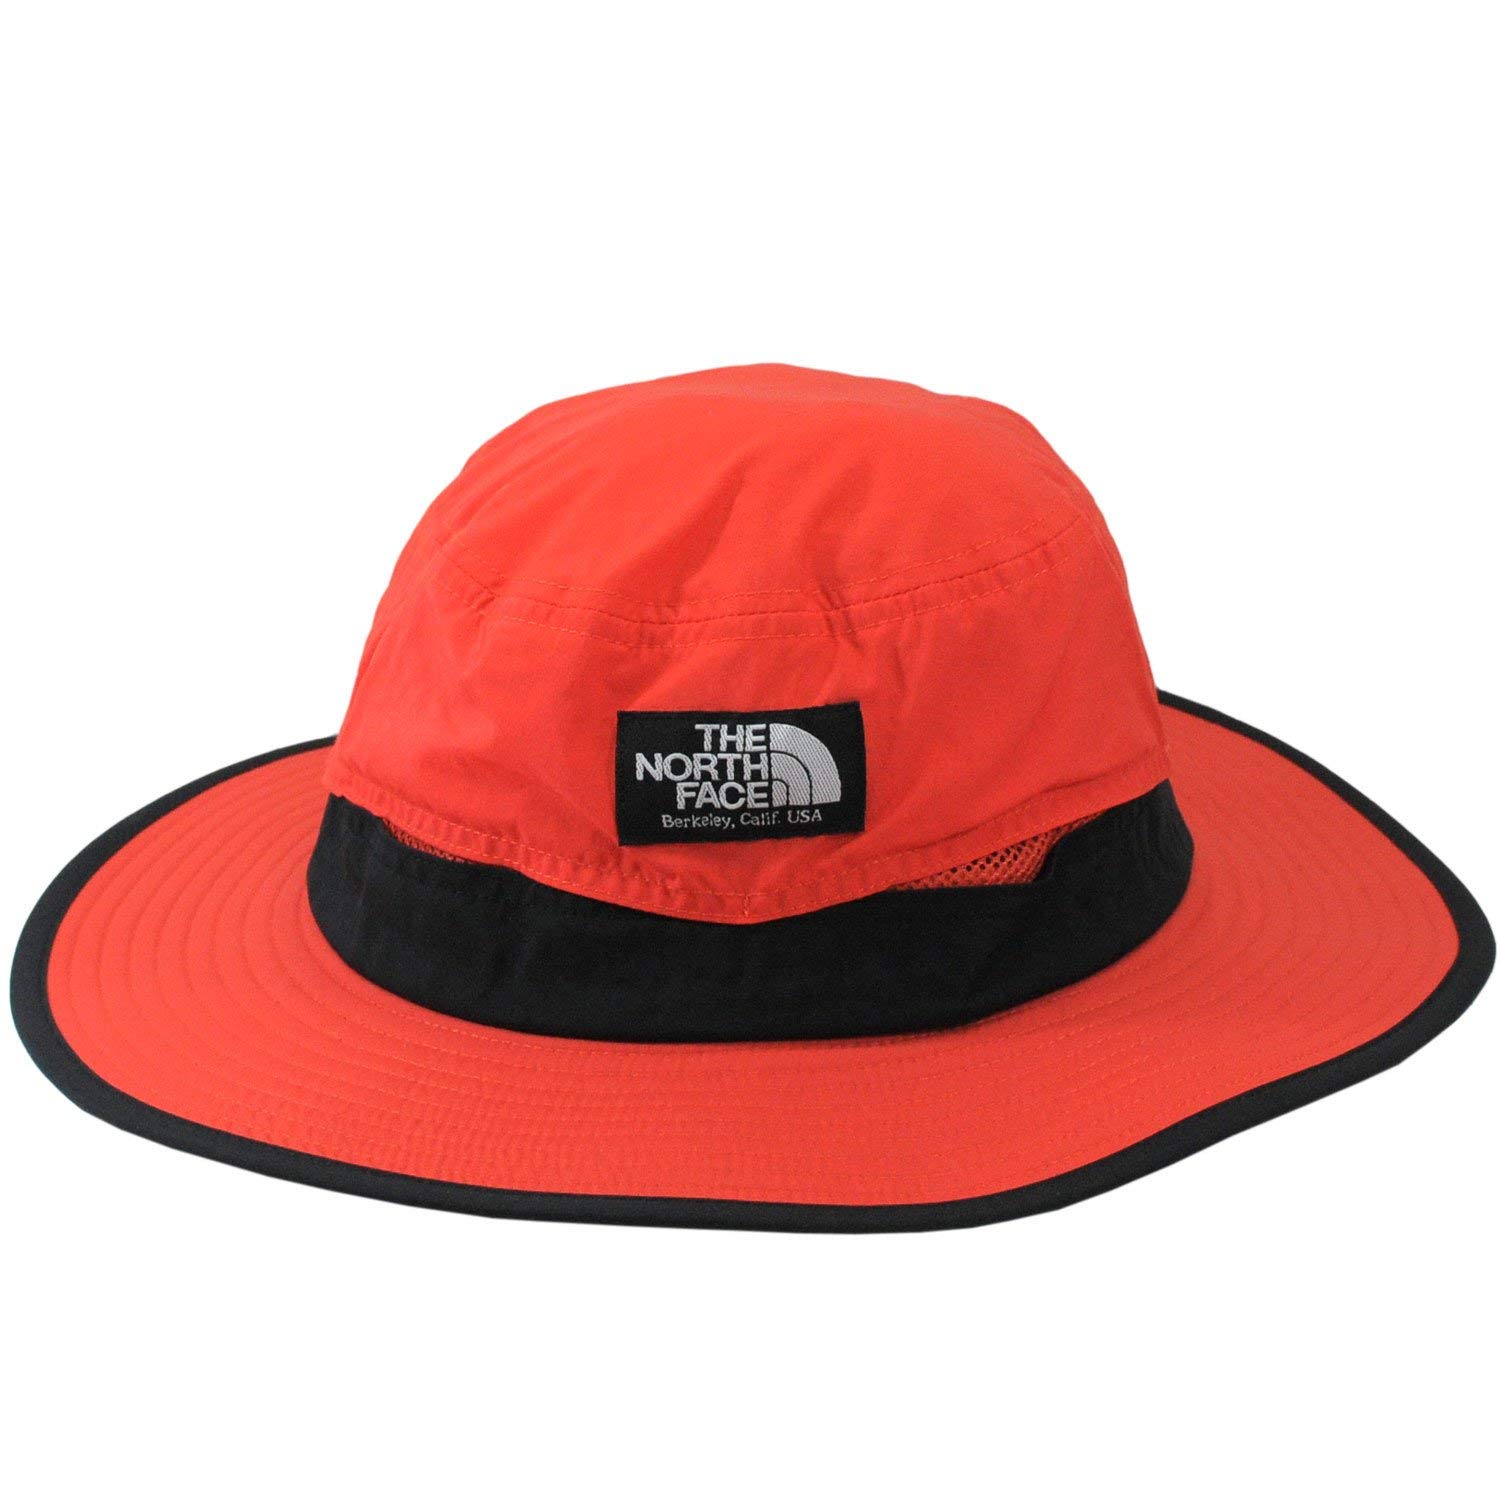 THE NORTH FACE  Journeys Cap 2点セット帽子